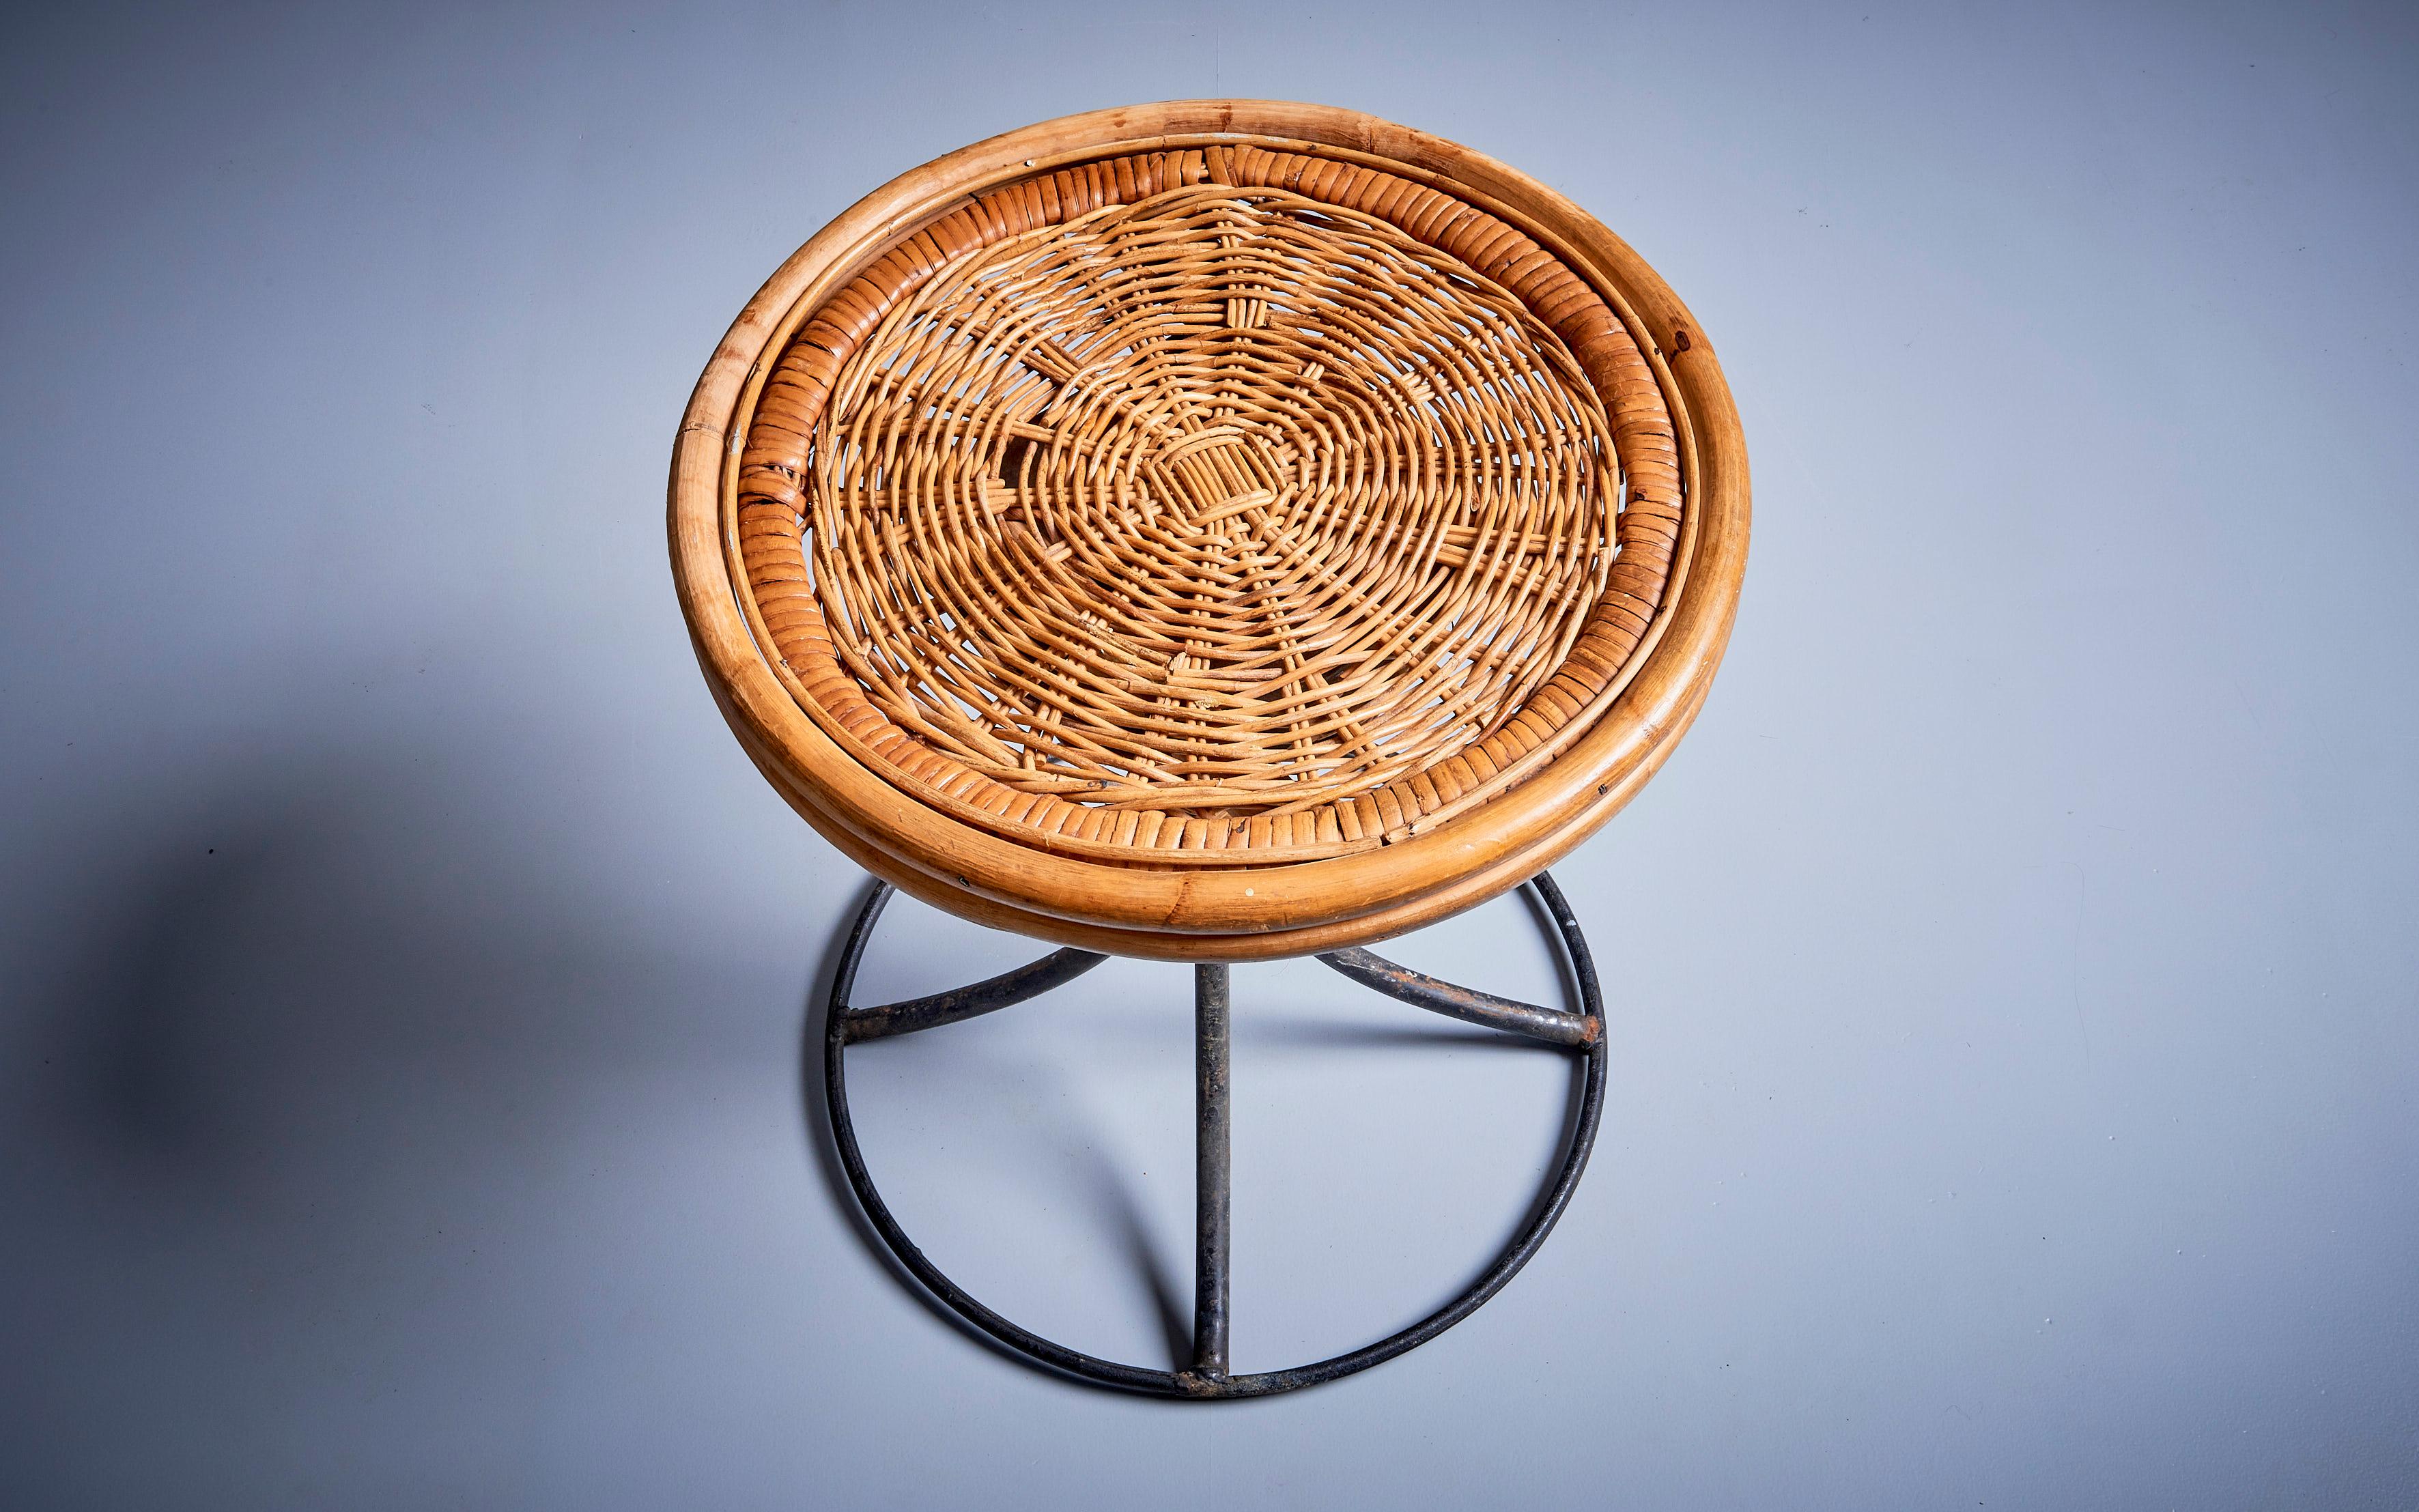 Danny Ho Fong stool in metal and wicker, USA - 1960s. Original fair condition. 